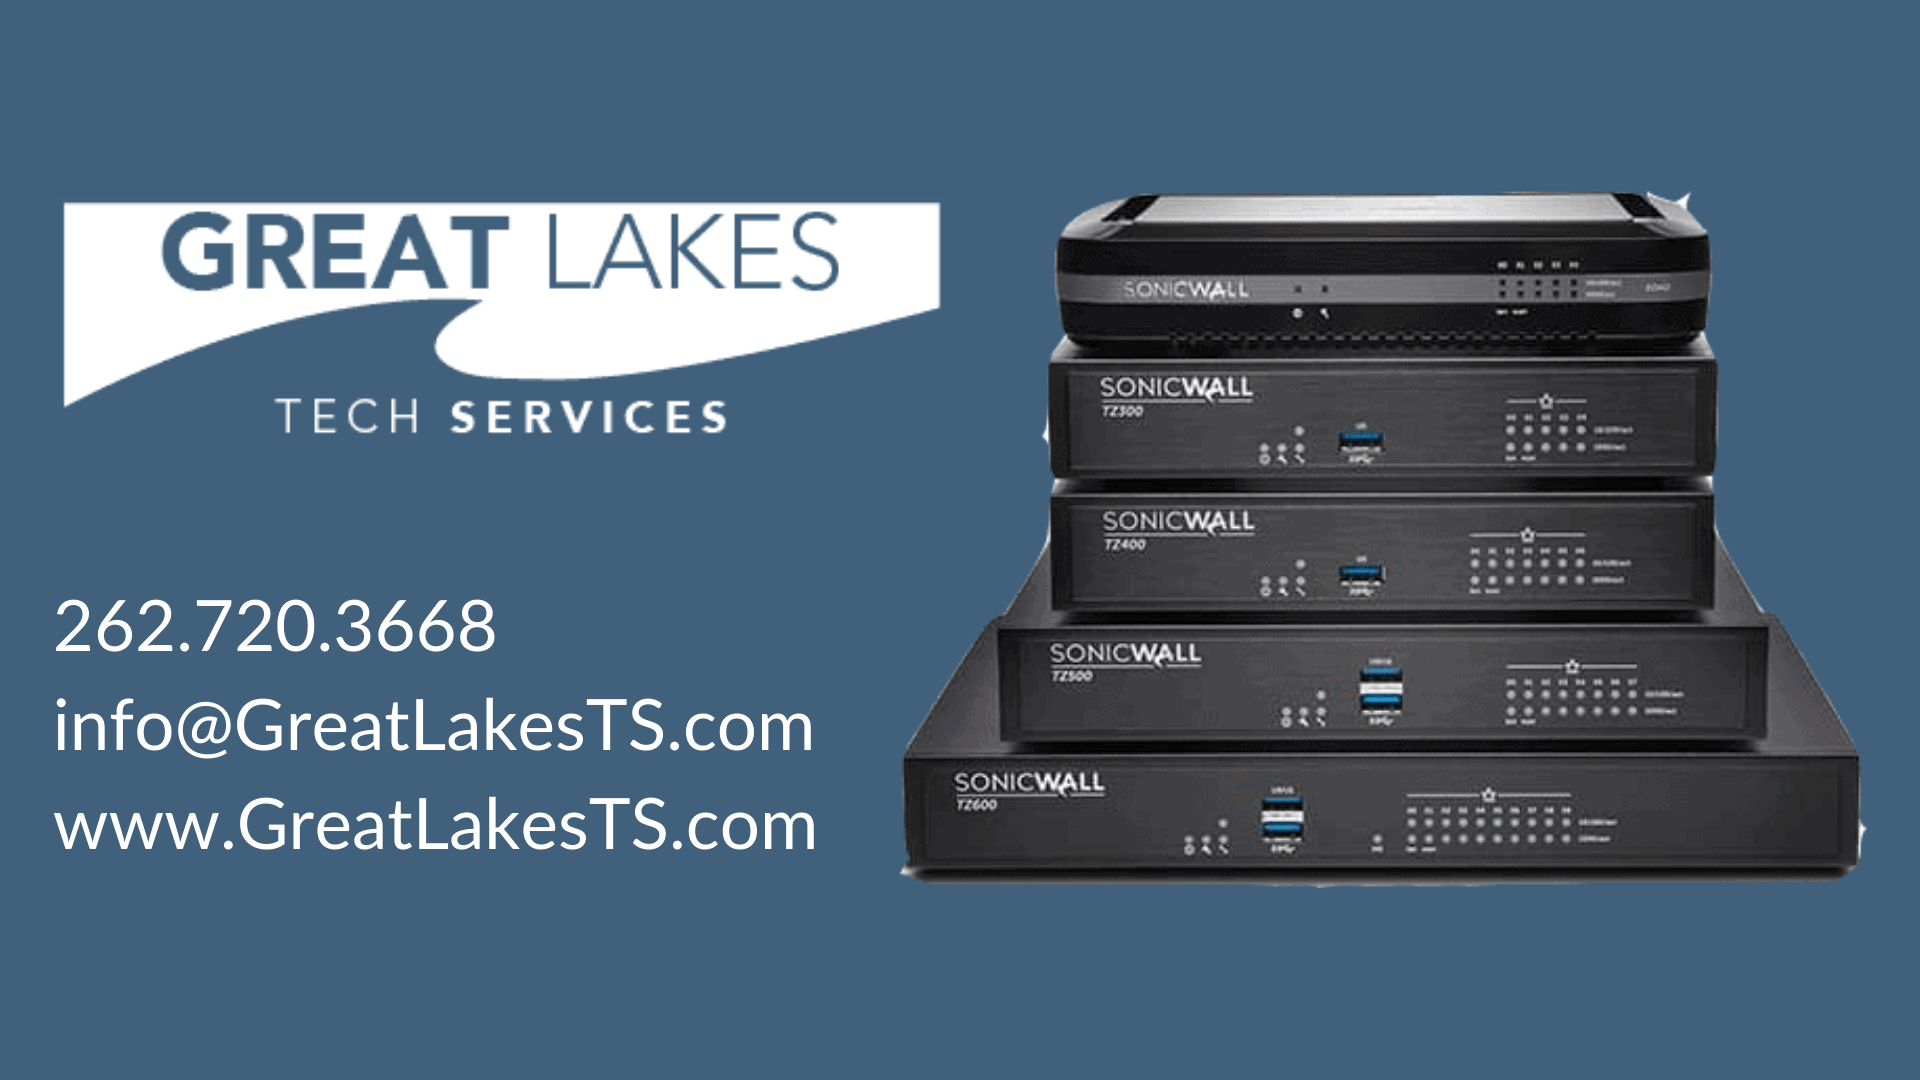 Great Lakes Tech Services logo and contact info. Take time for at least an annual free technology review to maintain a good grasp on where you're at.